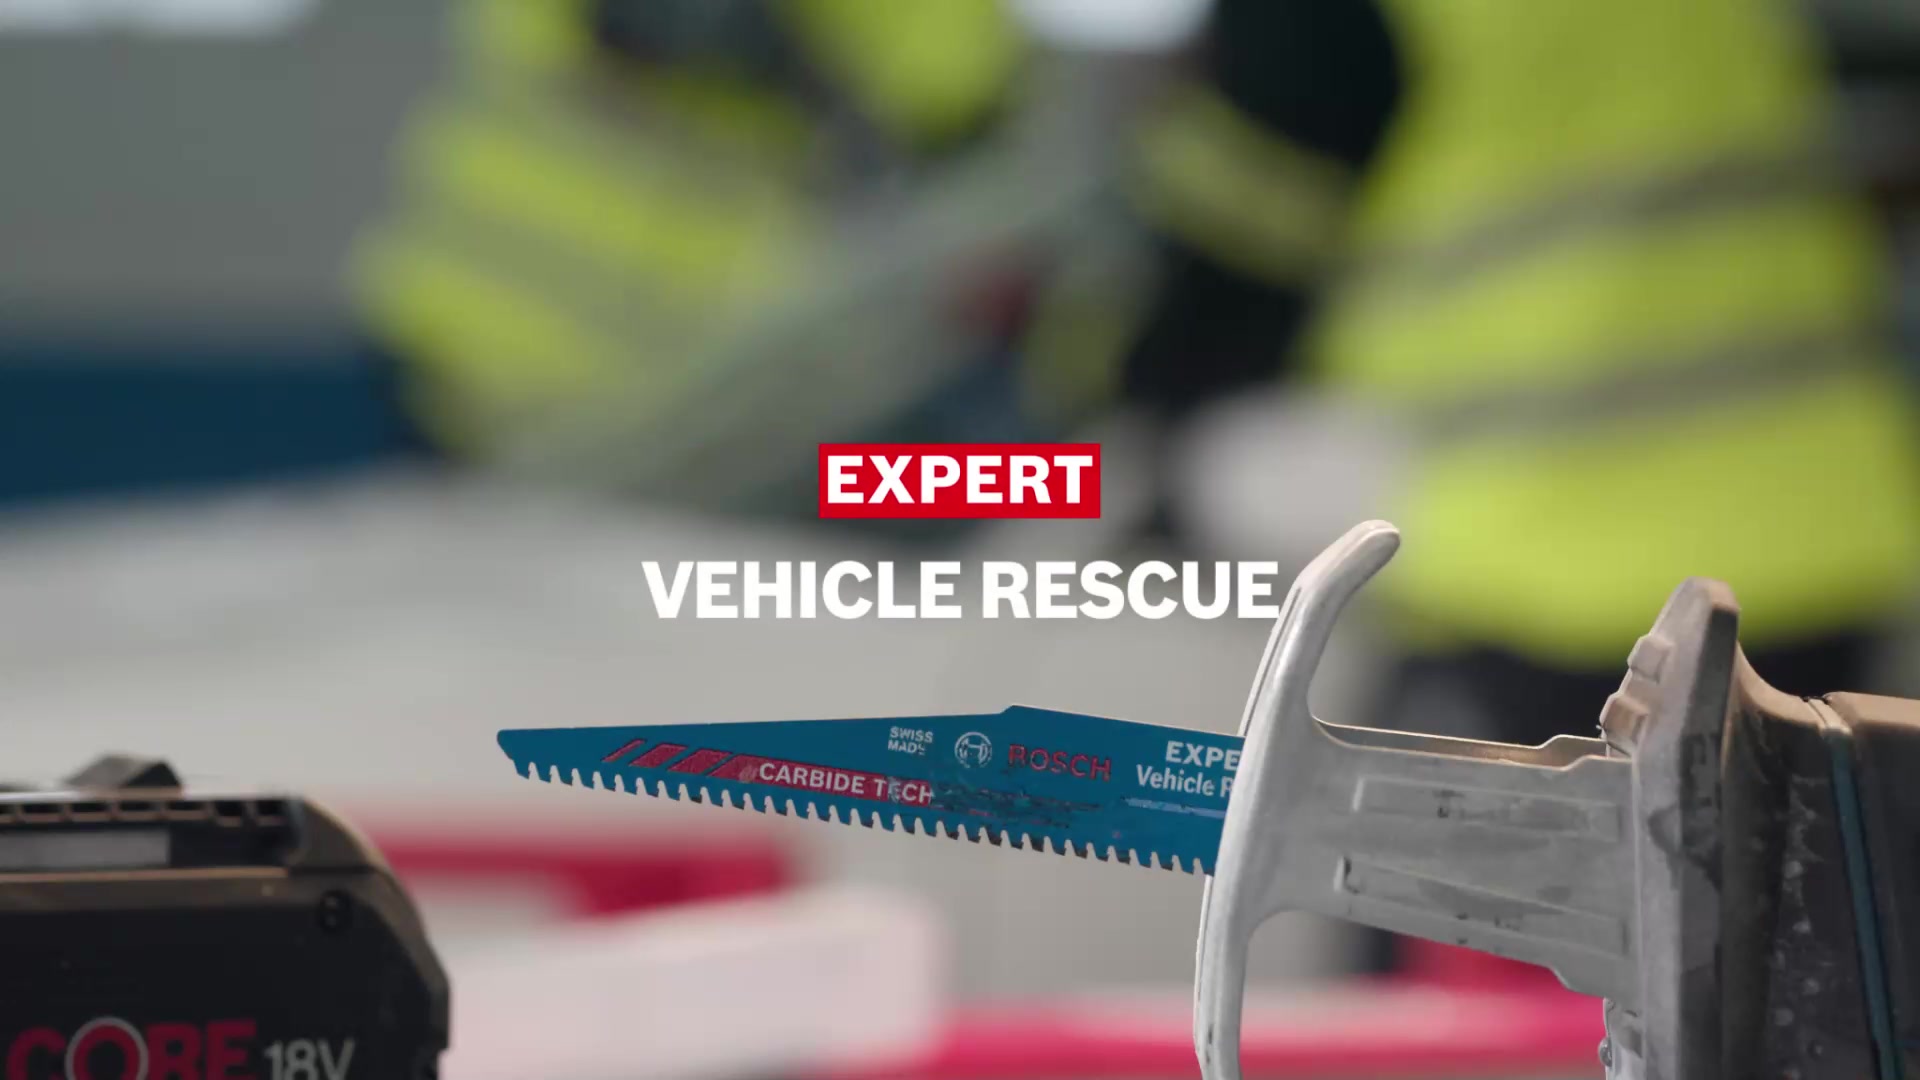 EXPERT Vehicle Rescue